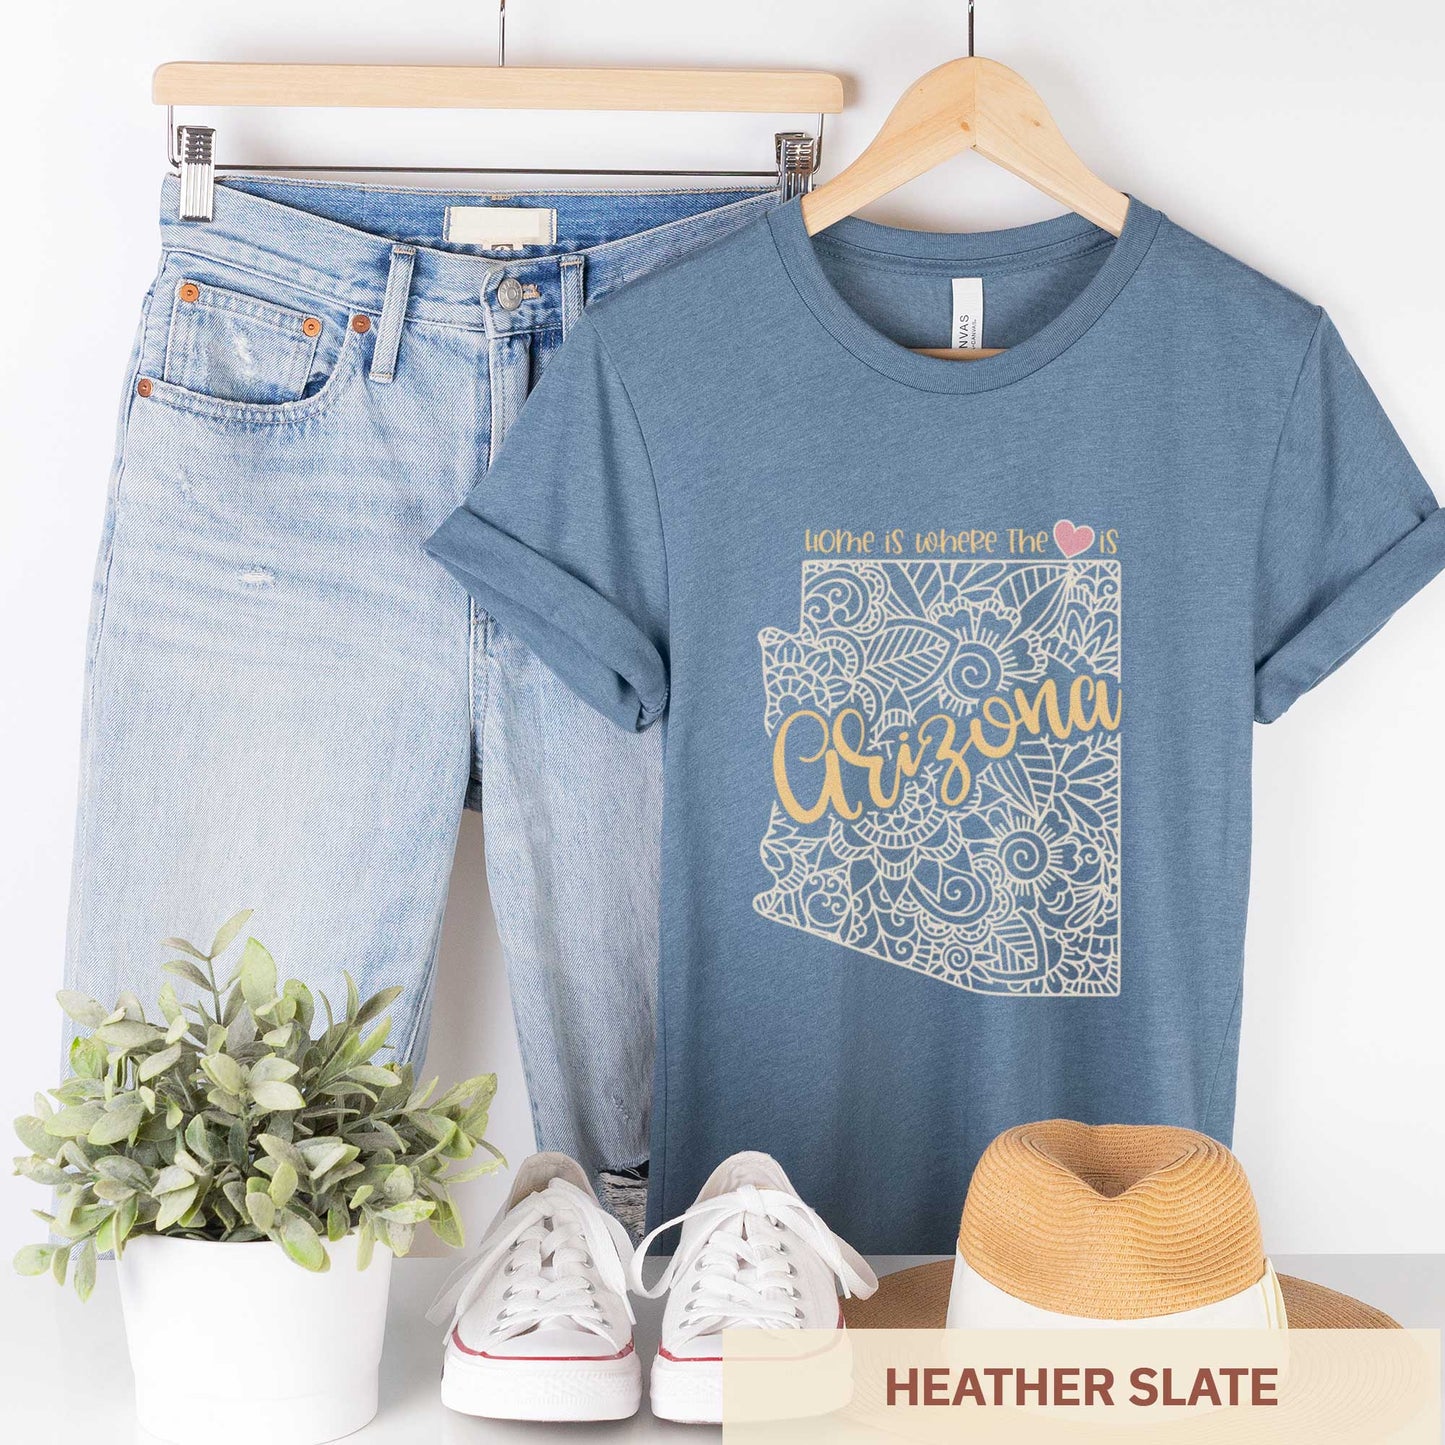 A hanging heather slate Bella Canvas t-shirt featuring a mandala in the shape of Arizona with the words home is where the heart is.